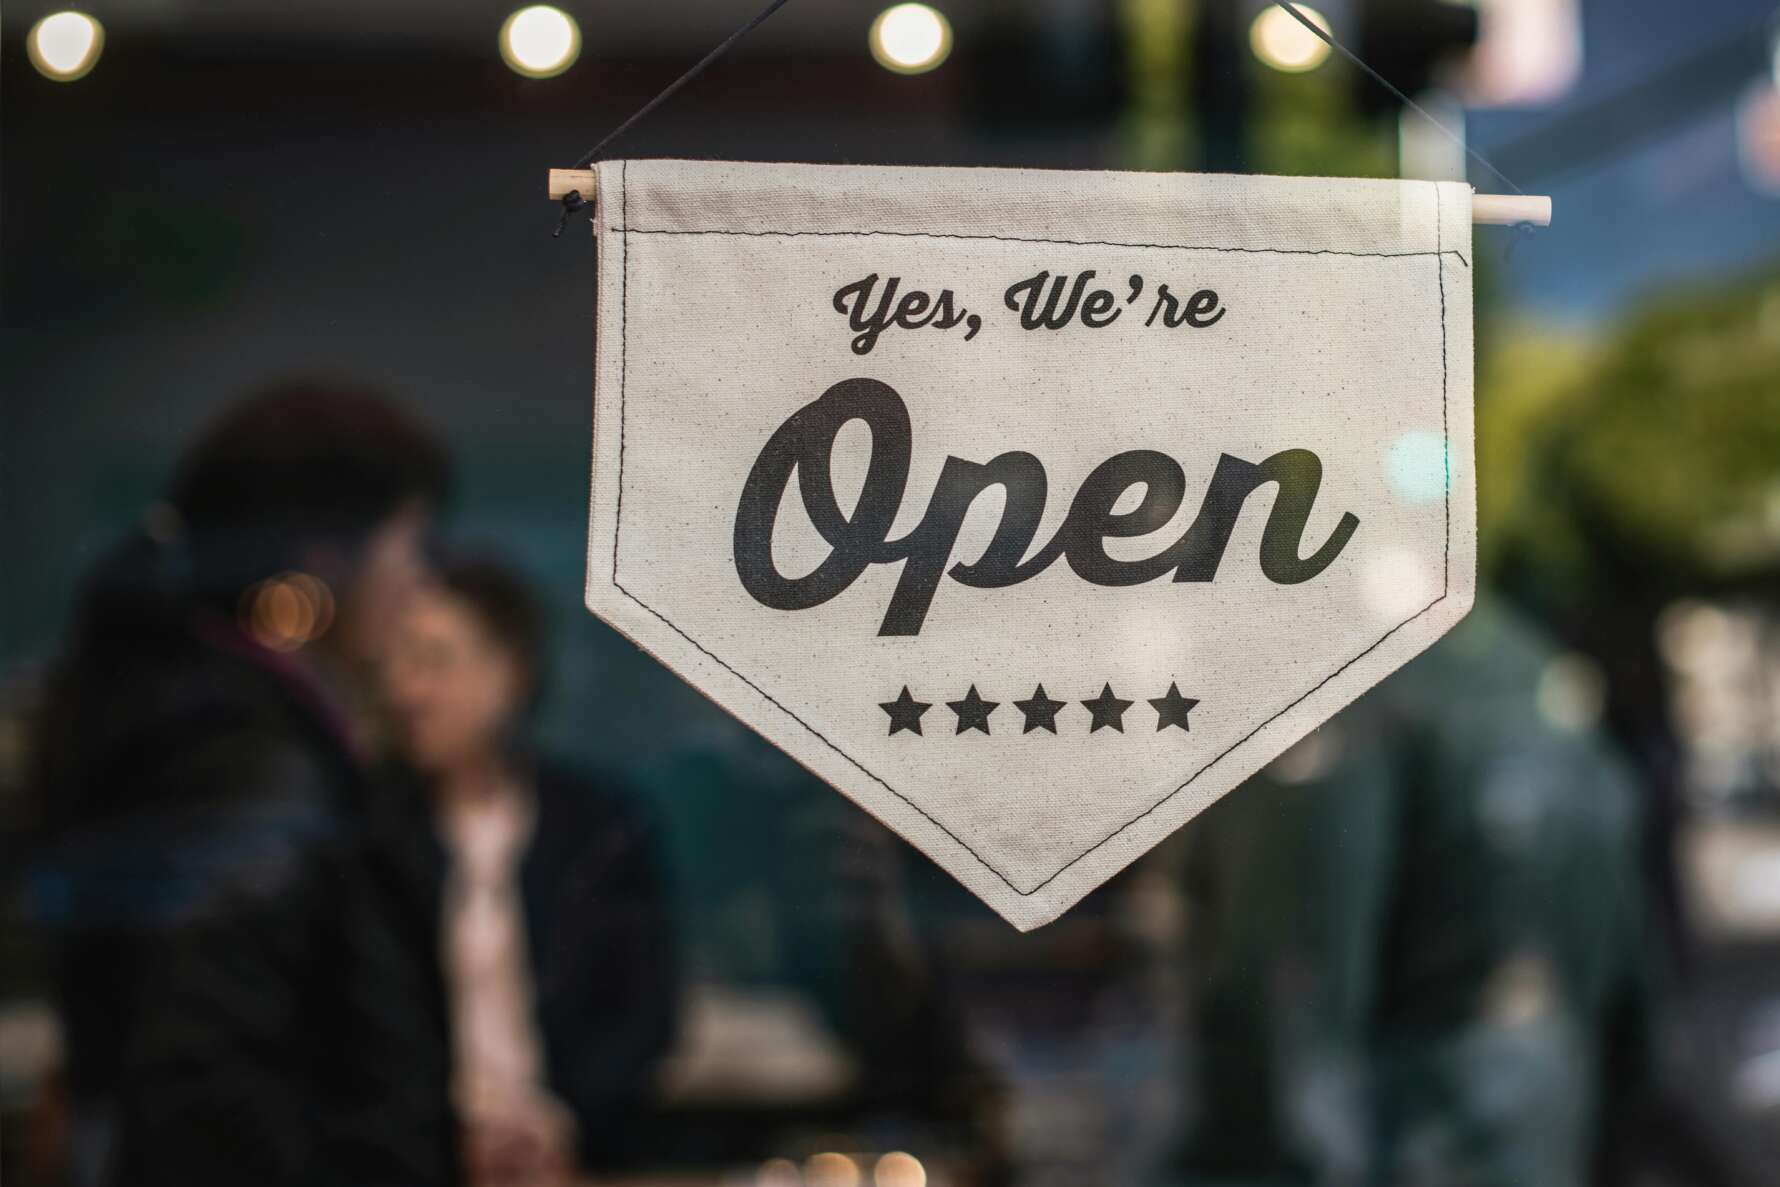 Photo of a sign saying "Yes, we're open" hanging at the door of a small business.